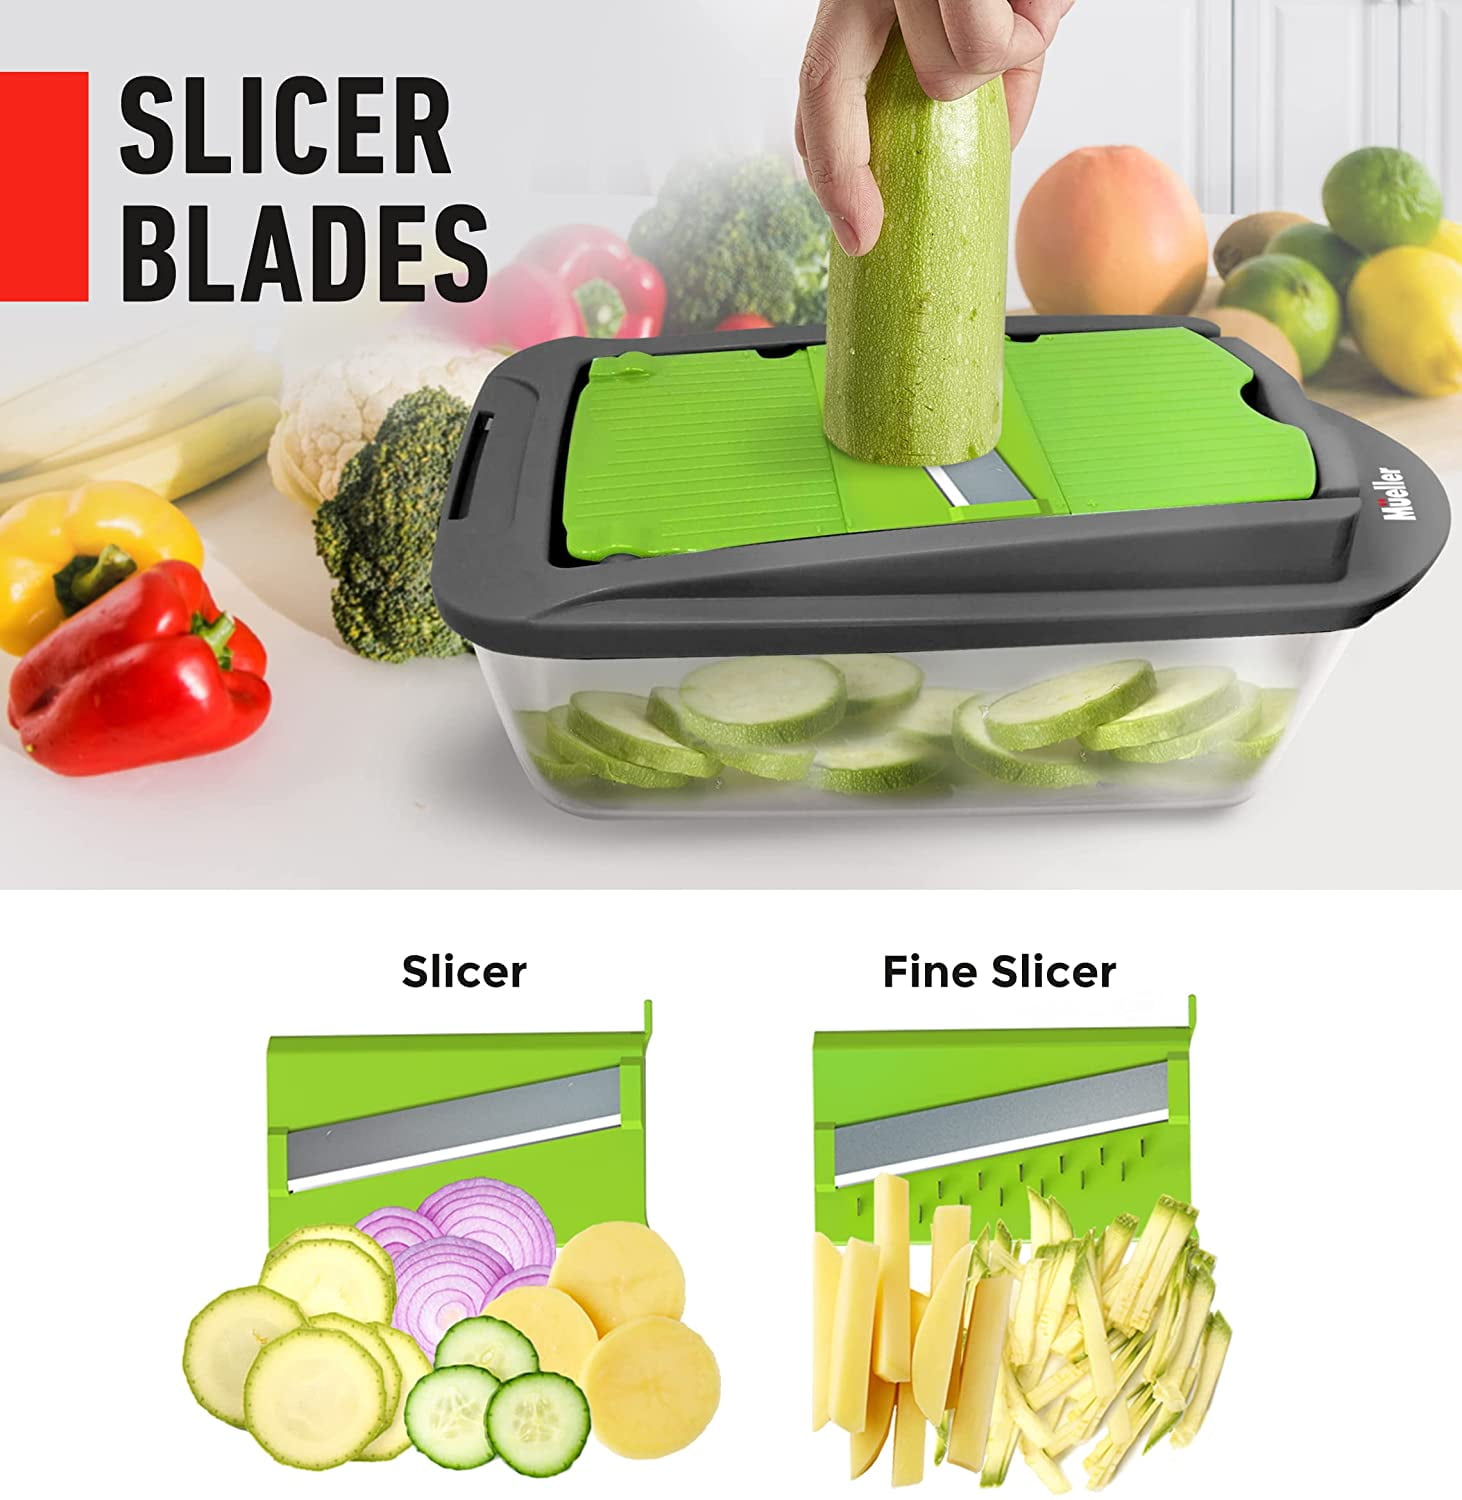 Unboxing and Review: Mueller Pro-Series 10-in-1 Vegetable Slicer and  Chopper with Egg Slicer 